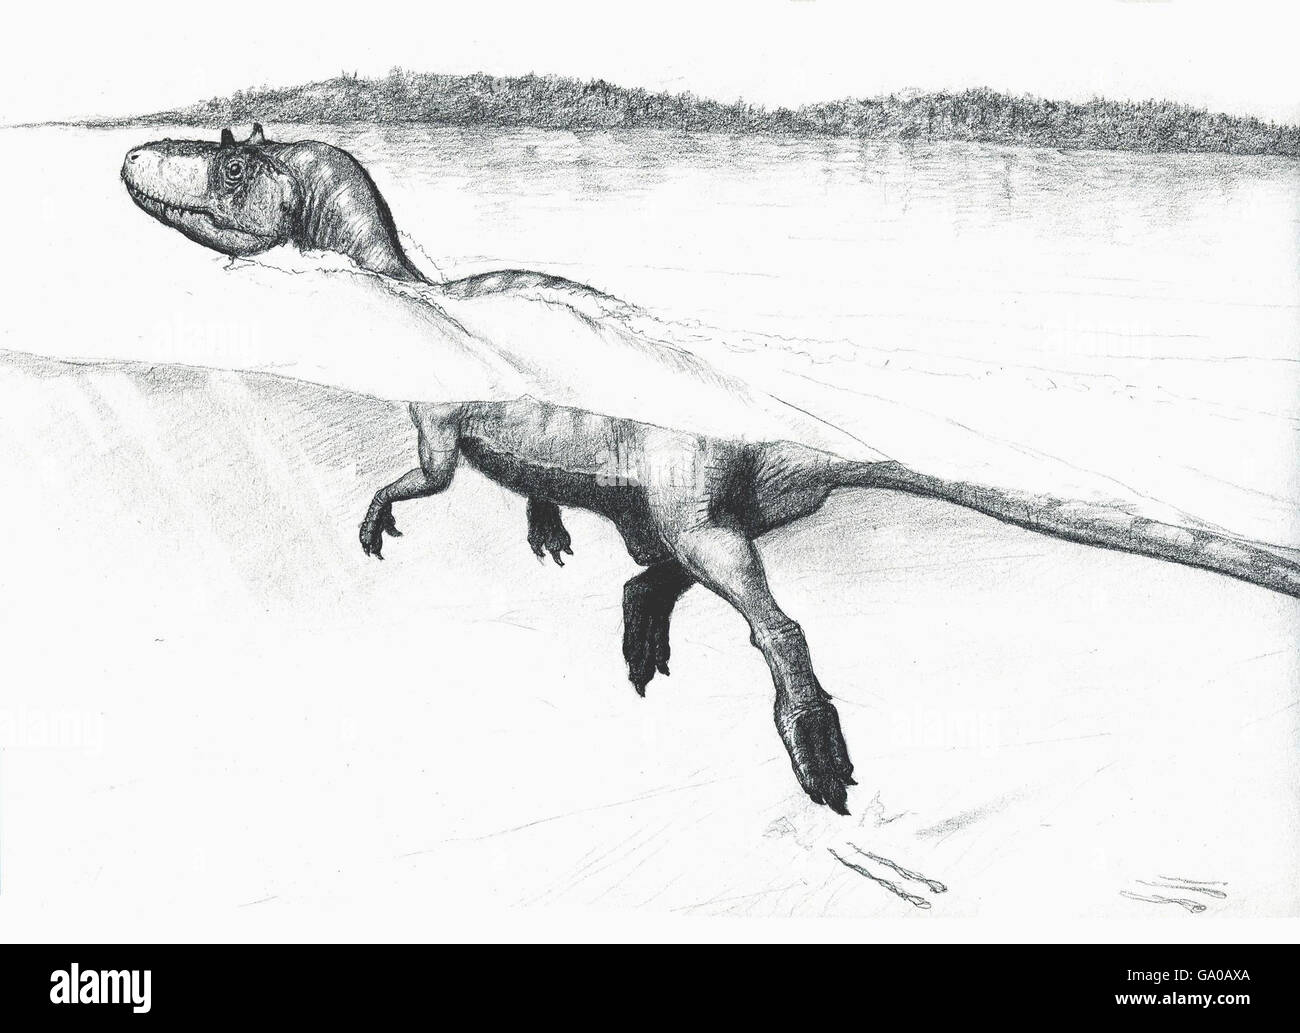 Undated Guillaume Suan, University of Lyon artist's impression of a swimming dinosaur. A remarkable row of claw prints preserved in an ancient lake bed provide the best evidence yet that some dinosaurs could swim. The 15-metre-long trackway in Spain was left by a large floating animal clawing at the sediment as it swam against a current 125 million years ago. Stock Photo